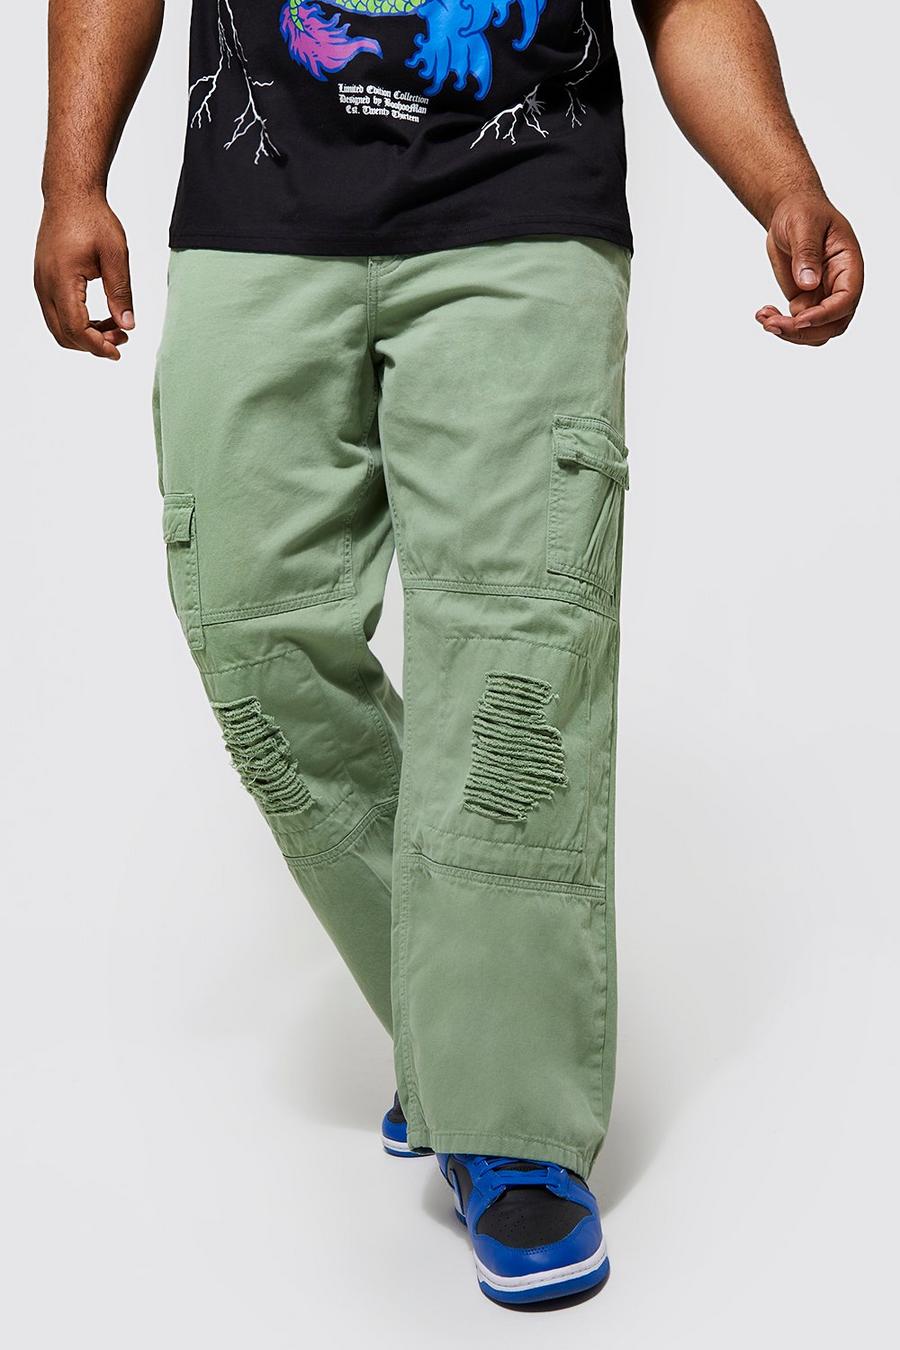 daughters of eve Corduroy Trousers sage green simple style Fashion Trousers Corduroy Trousers 